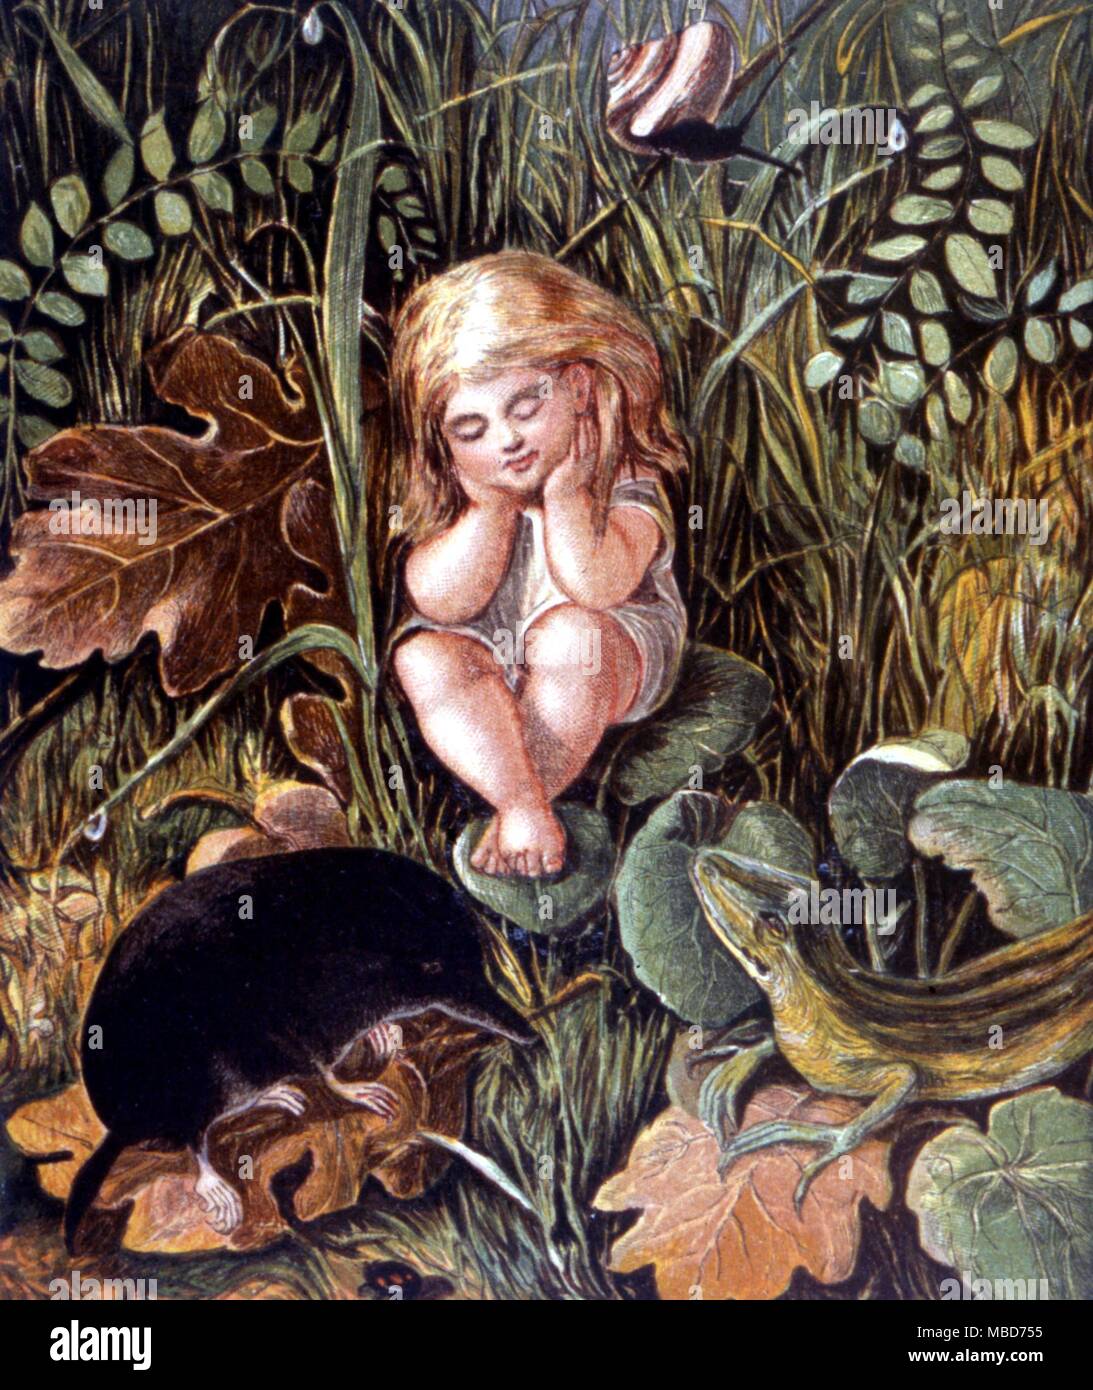 Fairies - Elementals - Fairy Kingdom - The child and the mole - from the 1846 zylographic The Story Without an End by Carova - printed by the Leighton brothers. Stock Photo